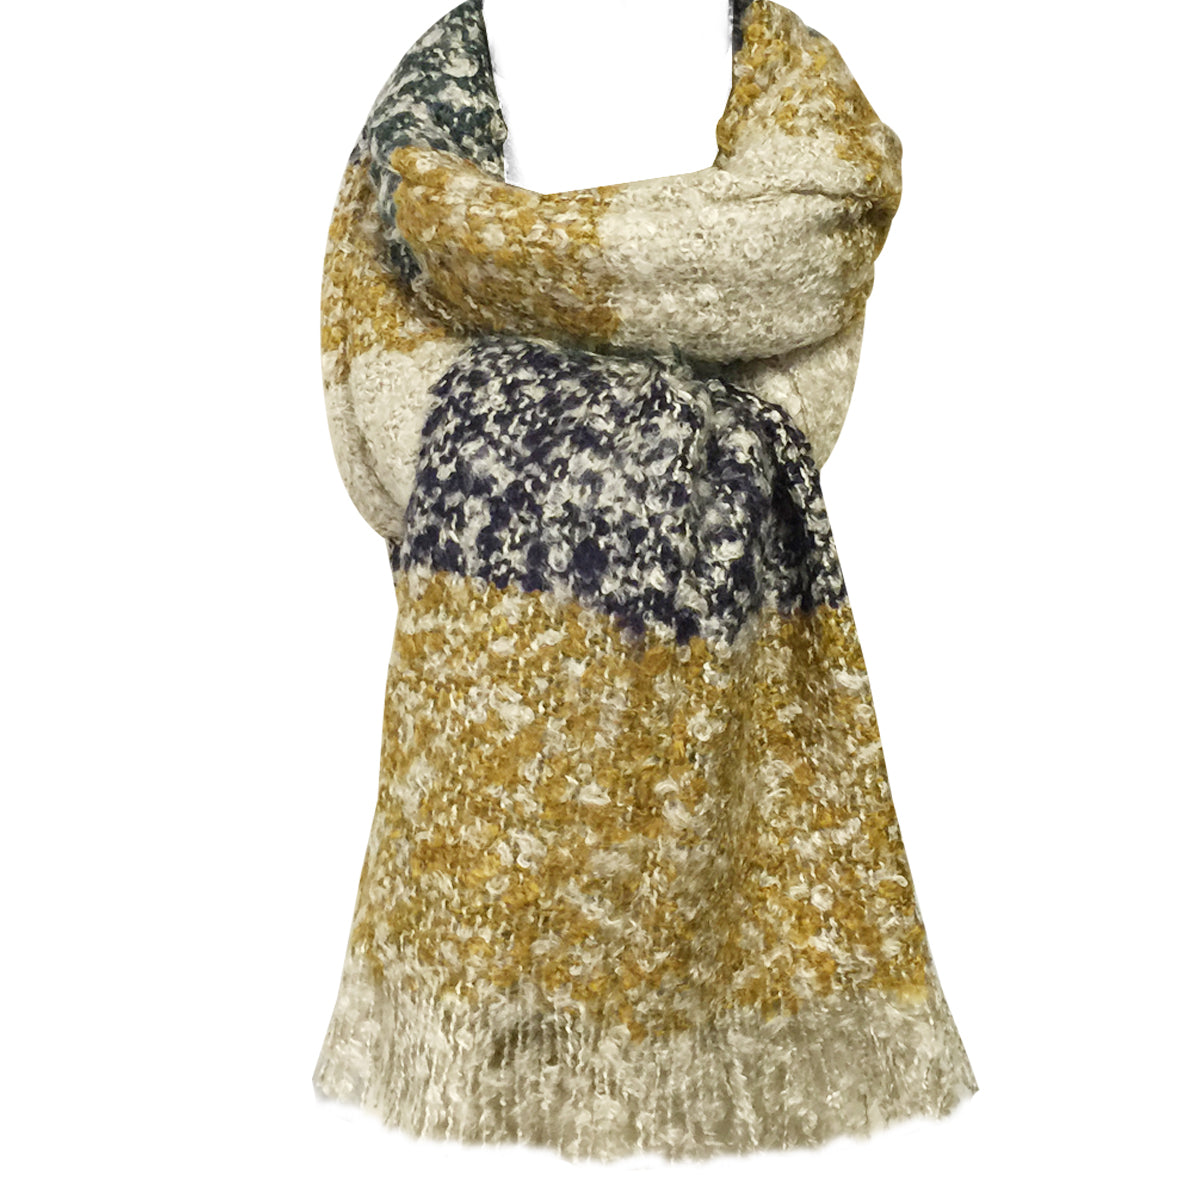 Wrapables Warm Fall and Winter Shawl Wrap Scarf with Tassels